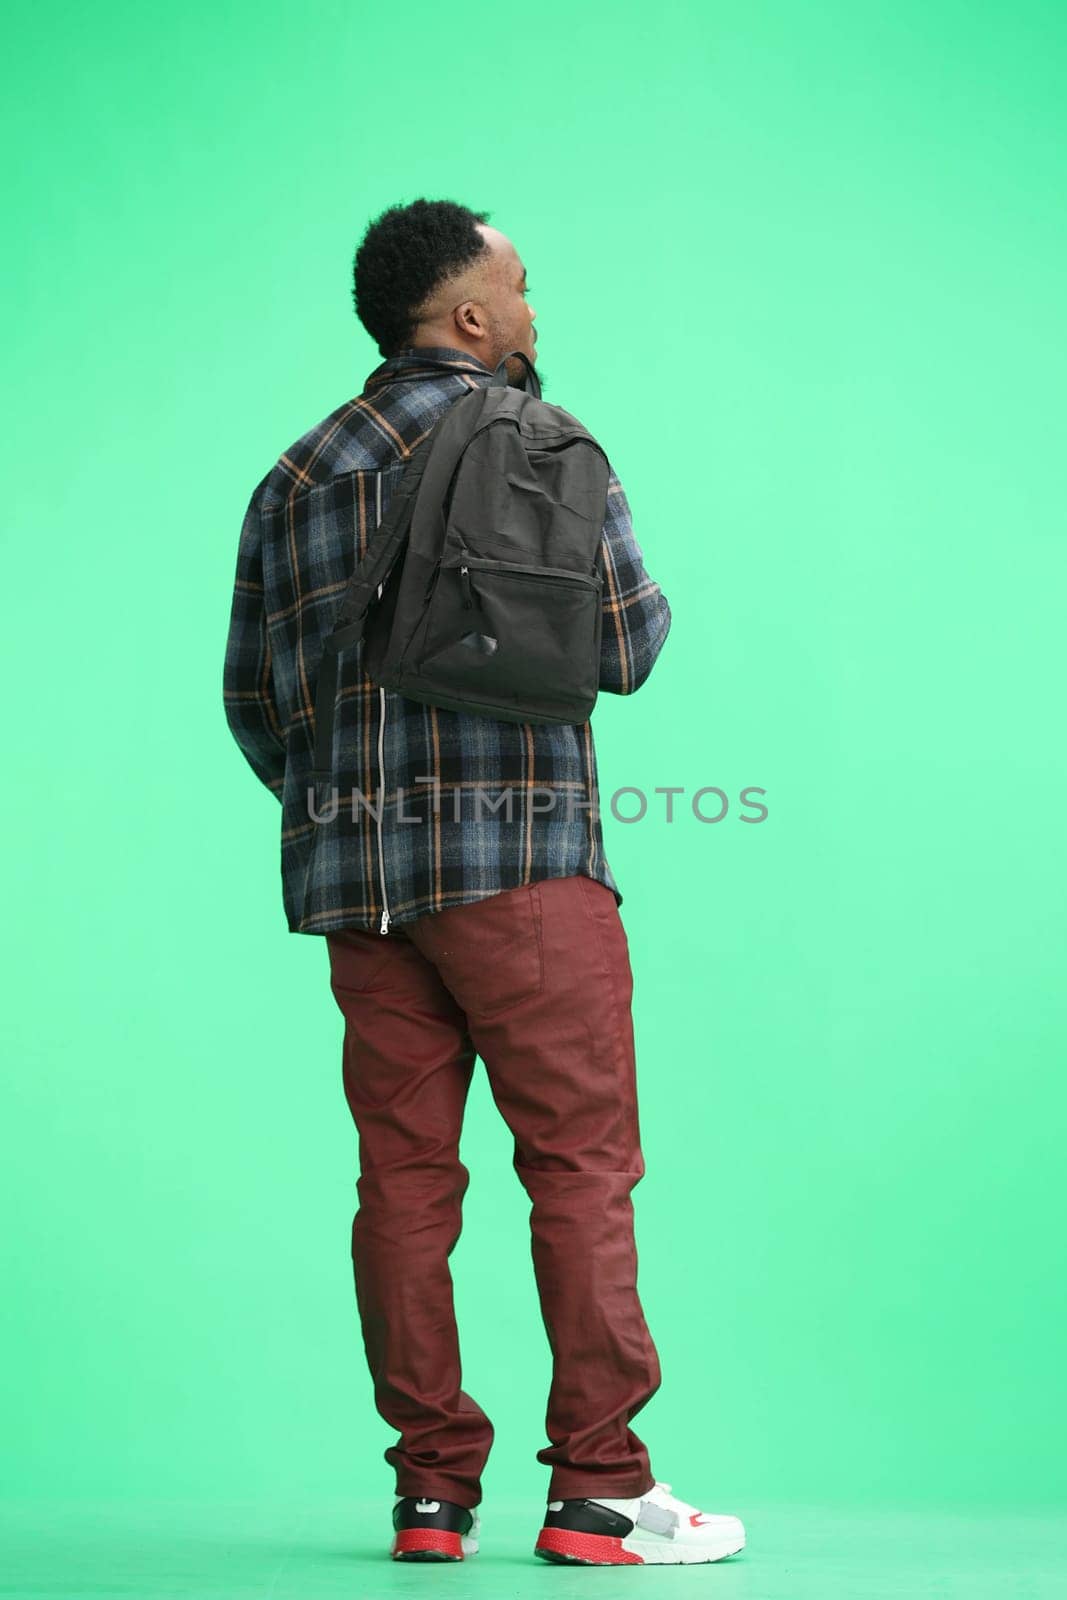 A man, full-length, on a green background, with a backpack.